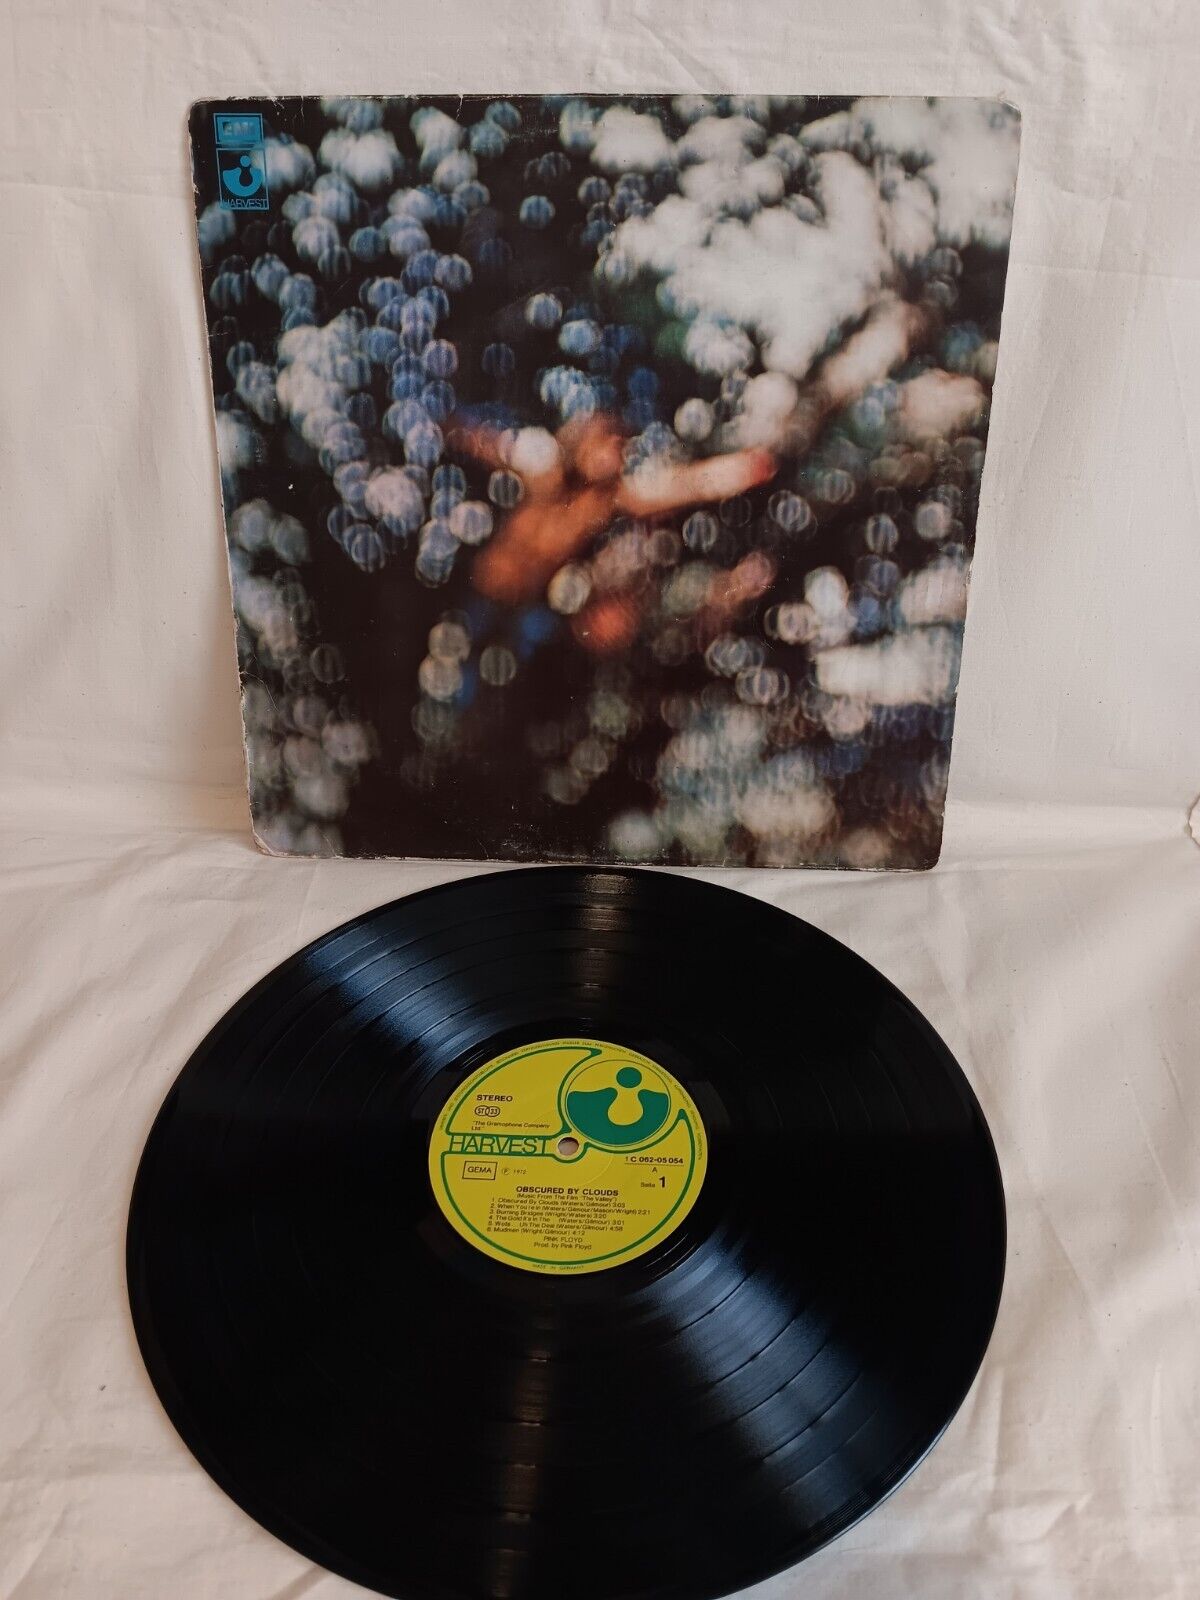 PINK FLOYD* OBSCURED BY CLOUDS* GERMANY * FIRST PRESSING * C 062...* IMPORT* LP